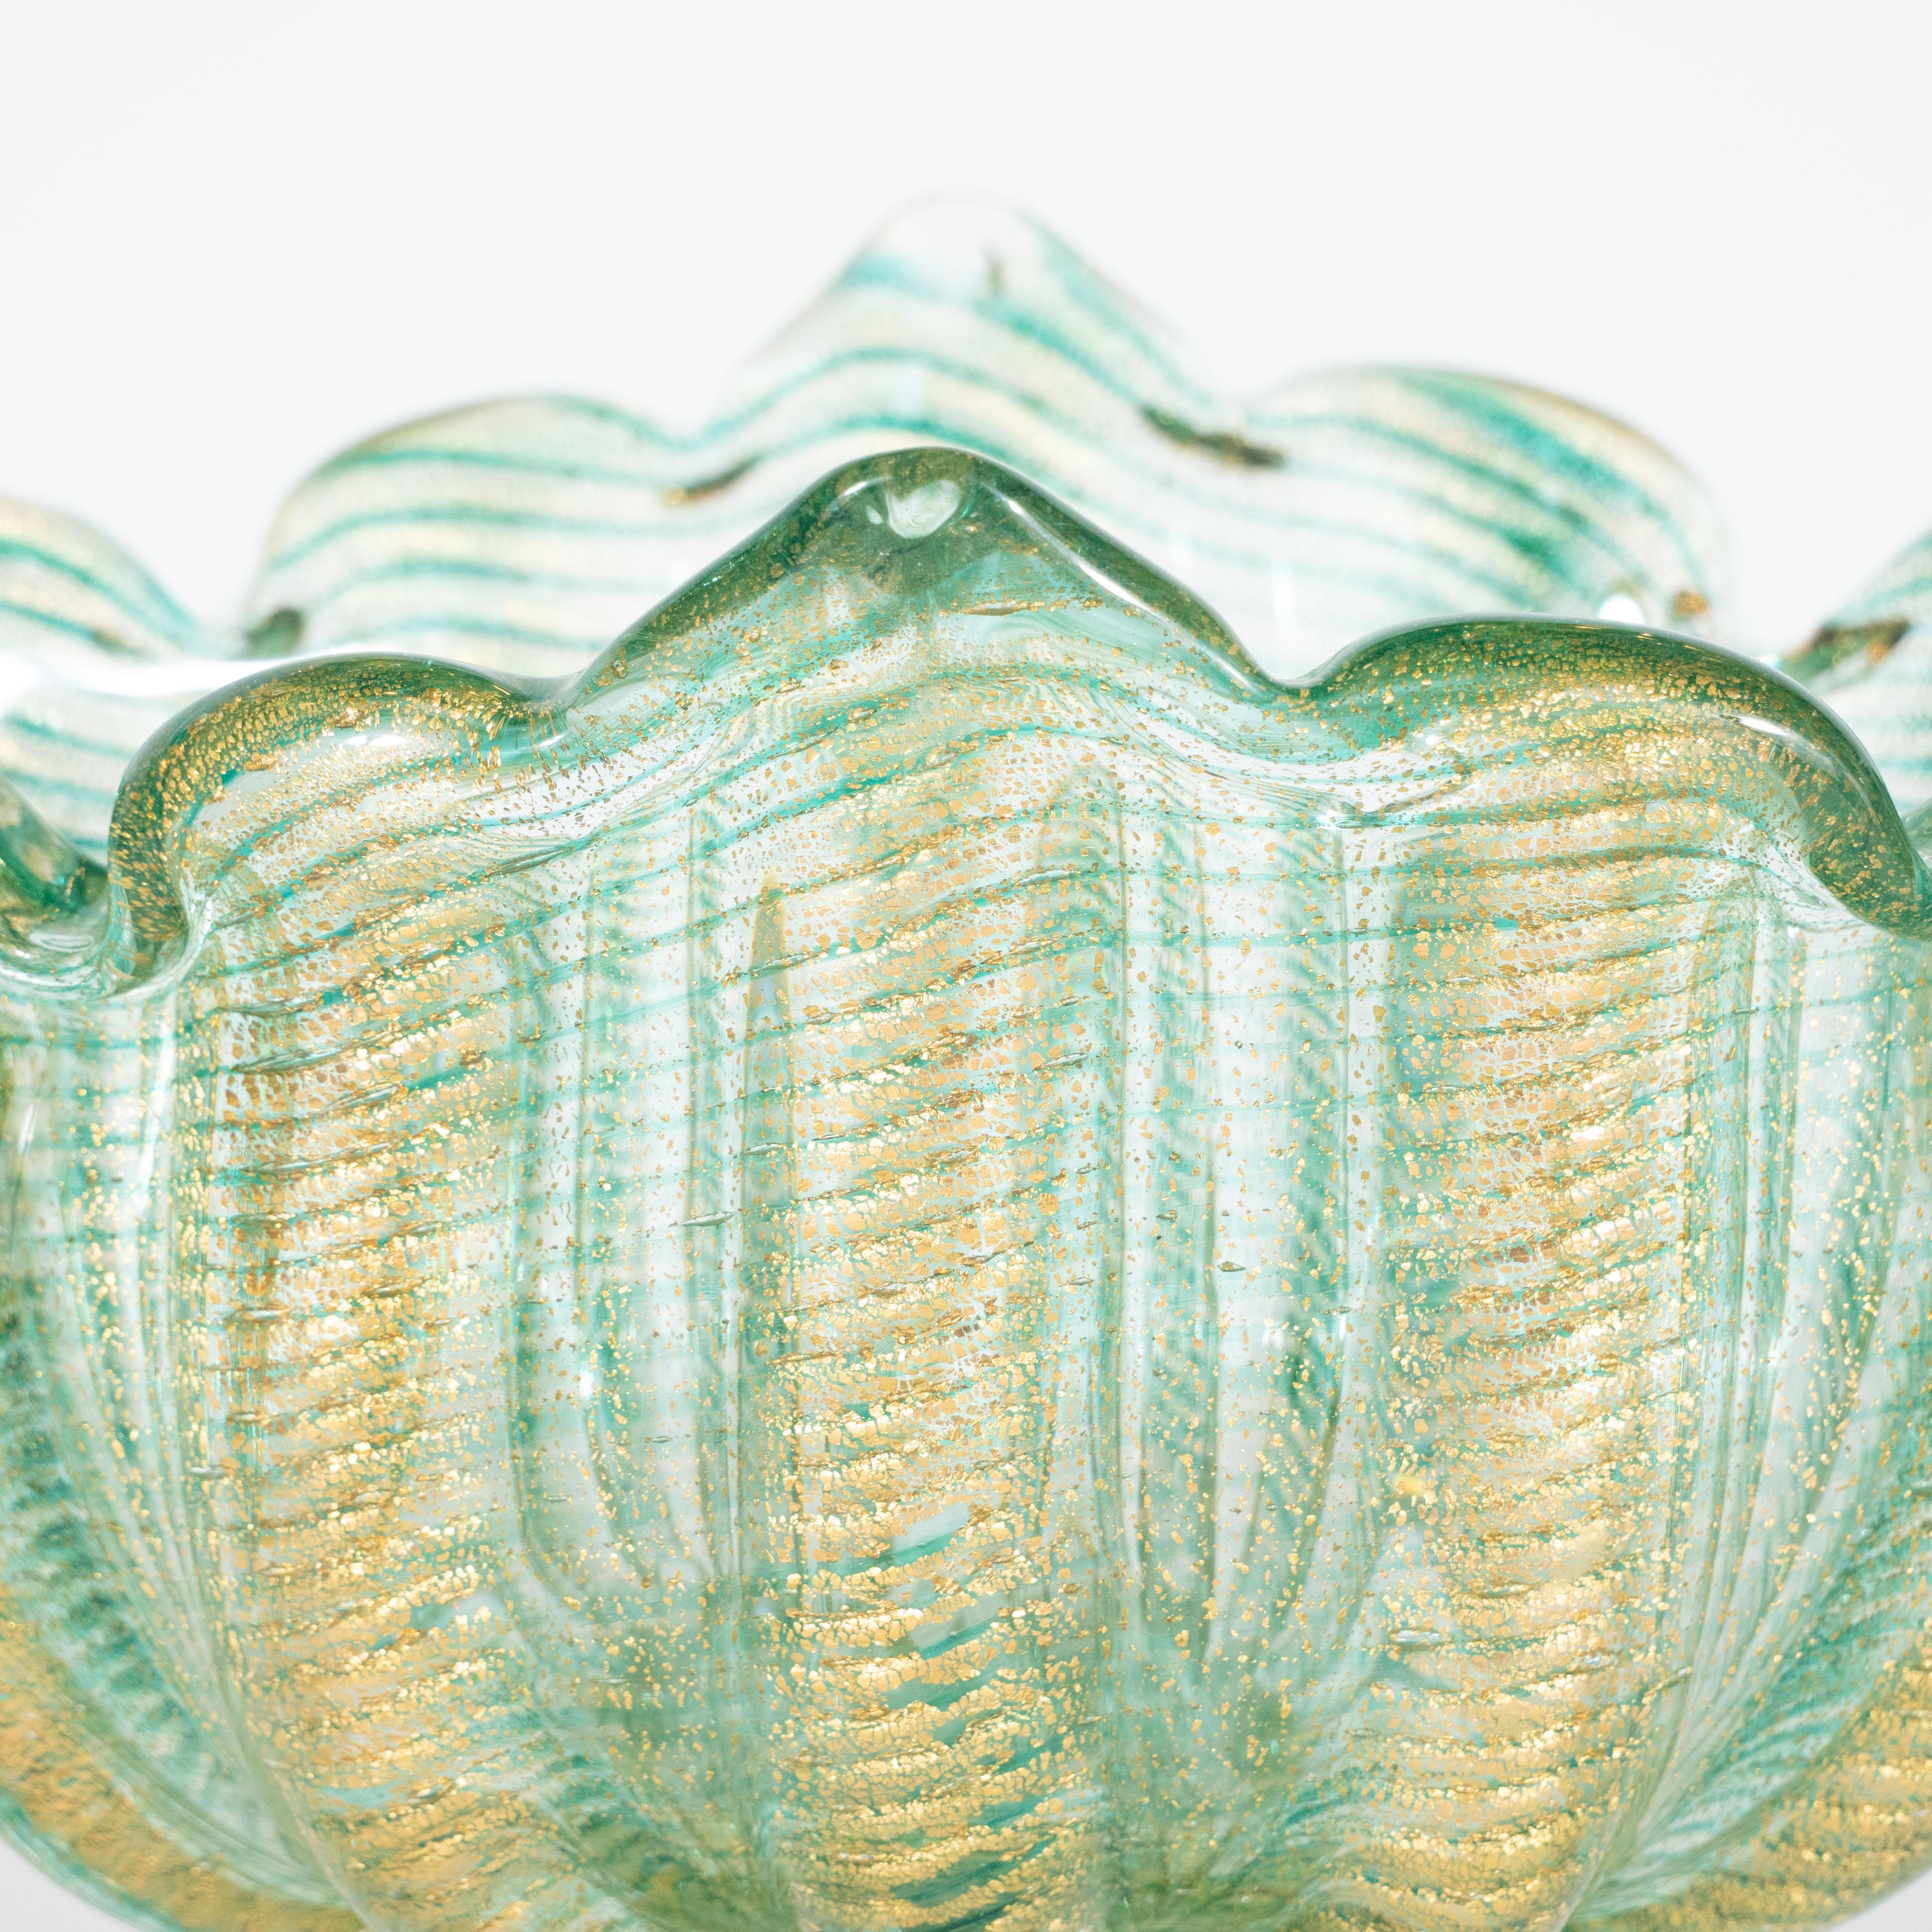 This beautiful celadon and 24-karat gold fleck Murano glass pedestal vase was hand-crafted by Barovier & Toso's celebrated artisans, circa 1950. The vase resembles an abstracted bloom and sits on a ribbed base with scalloped edges. Two rosettes are